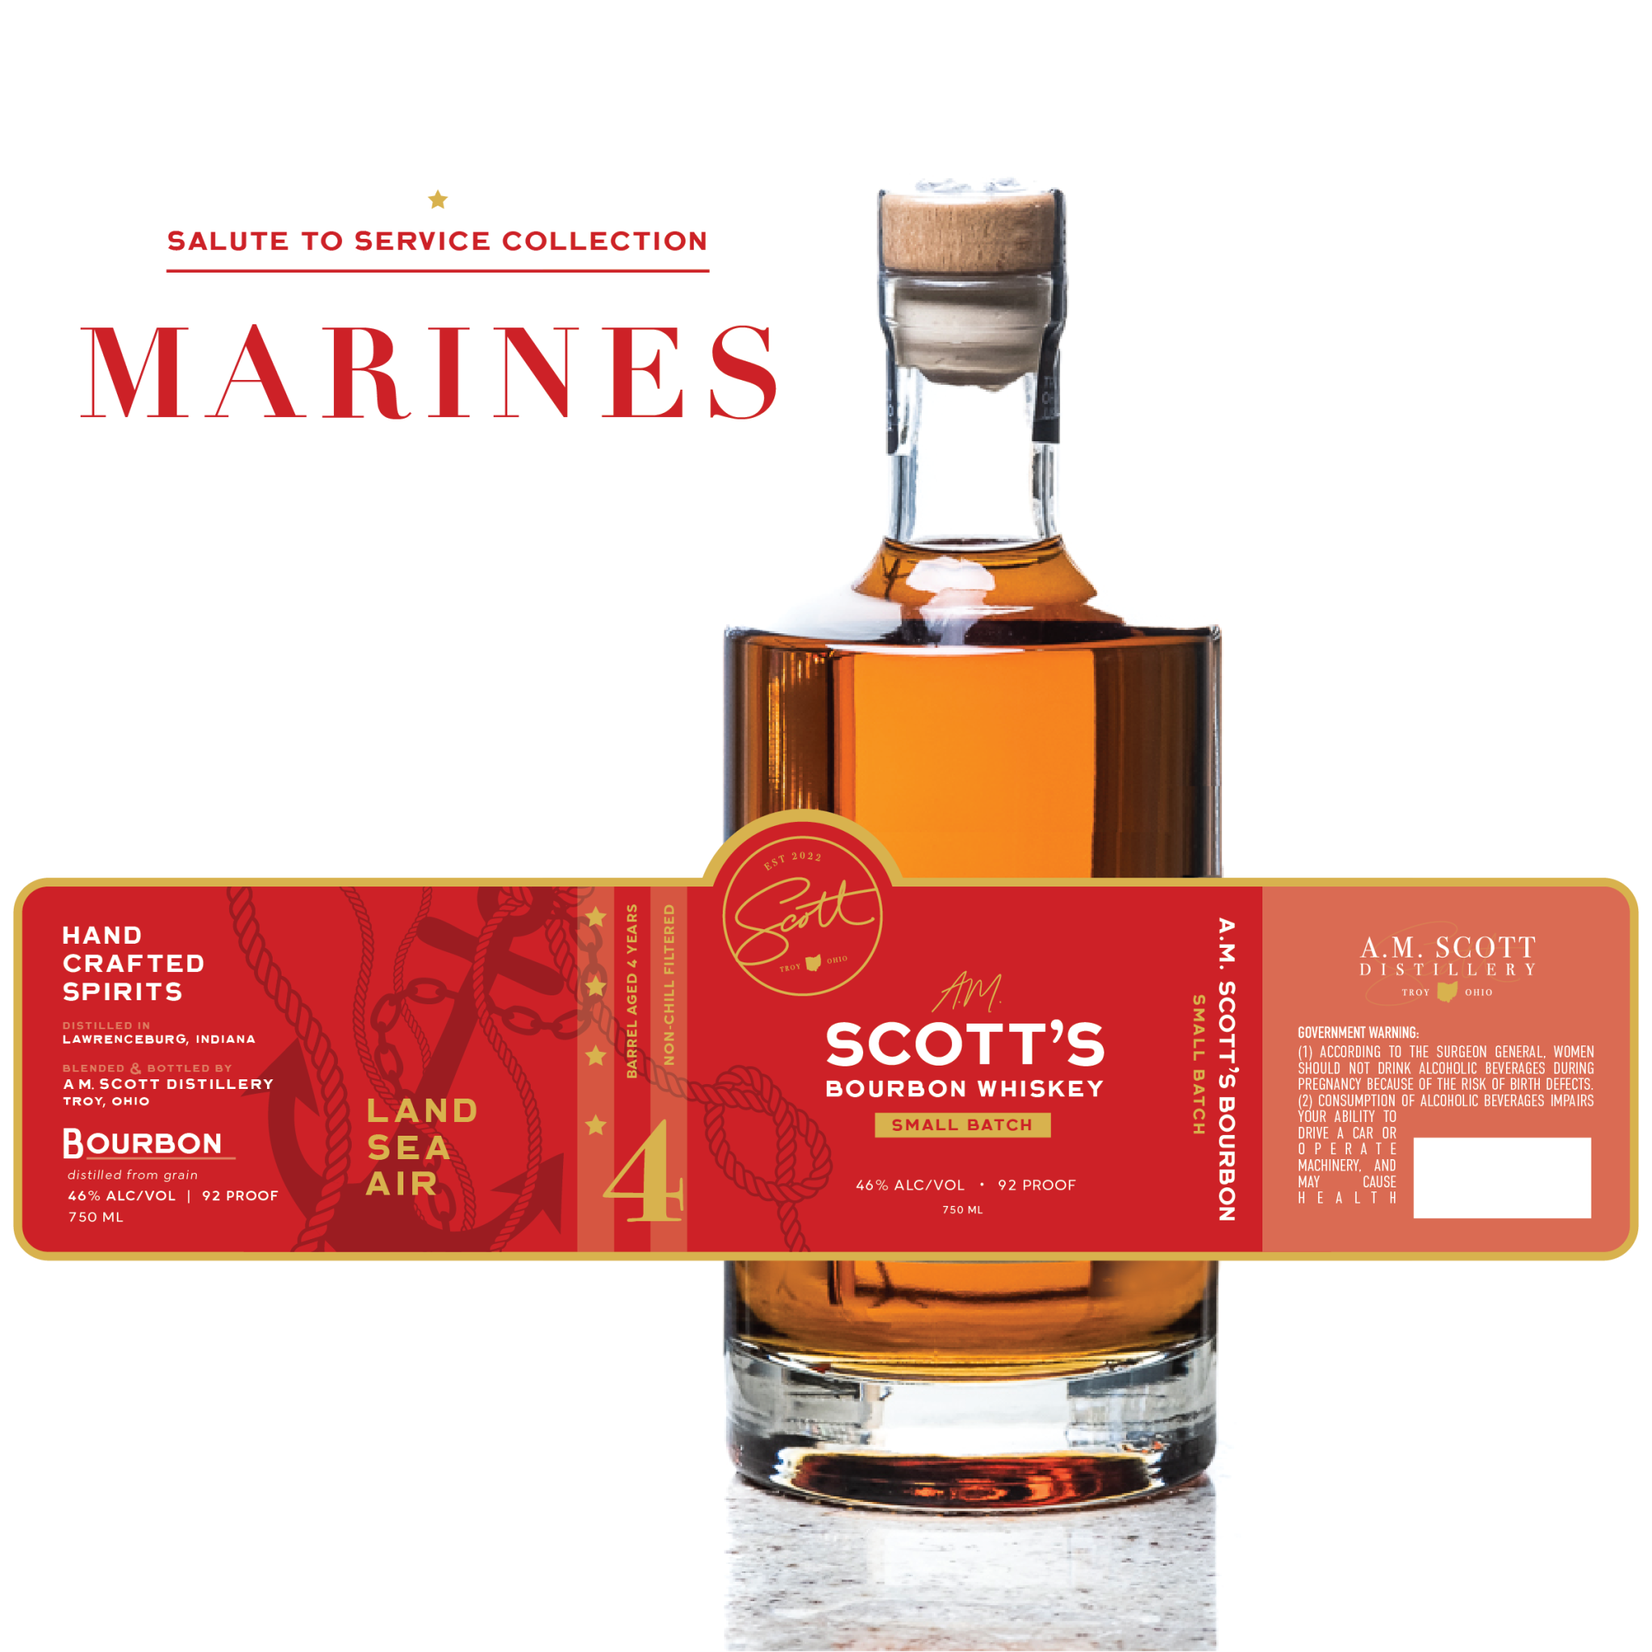 A.M. Scott's Salute to Service Collection - MARINES